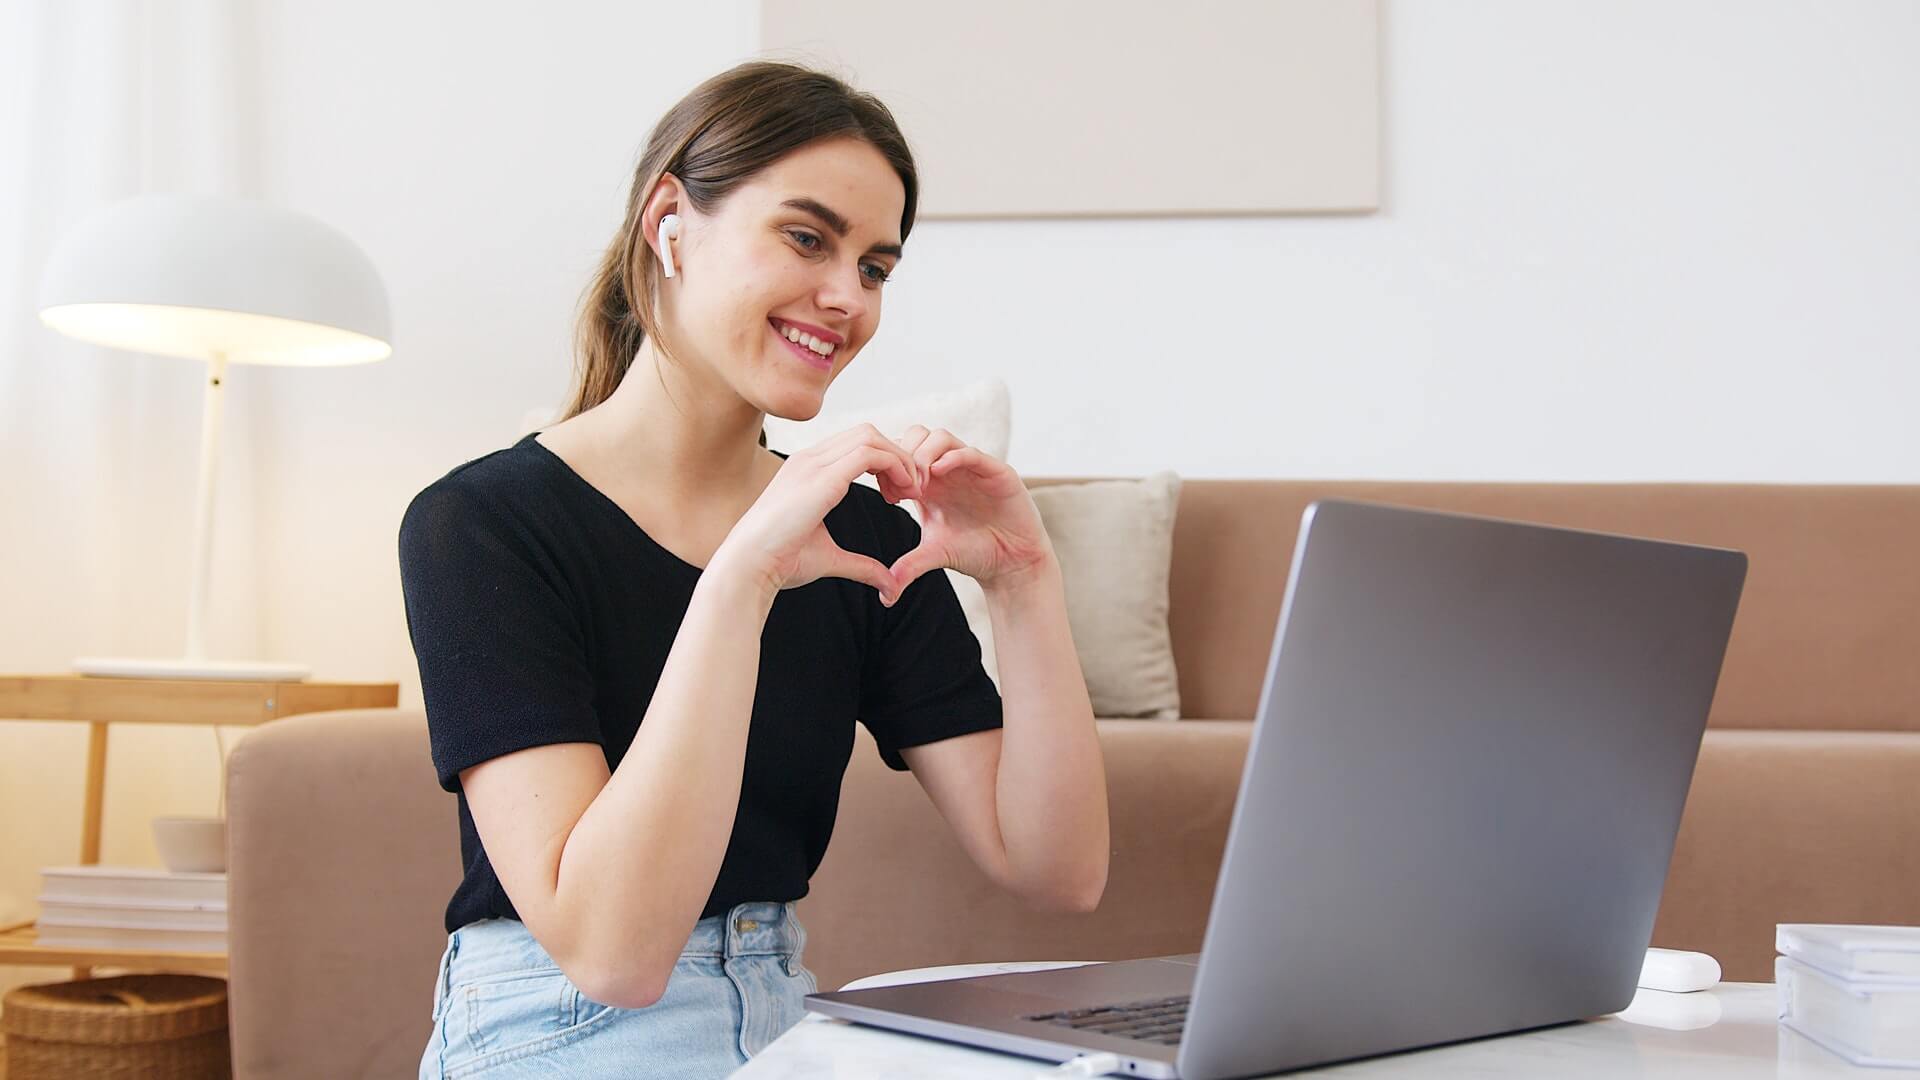 Woman making heart shape with her hands during live chat.